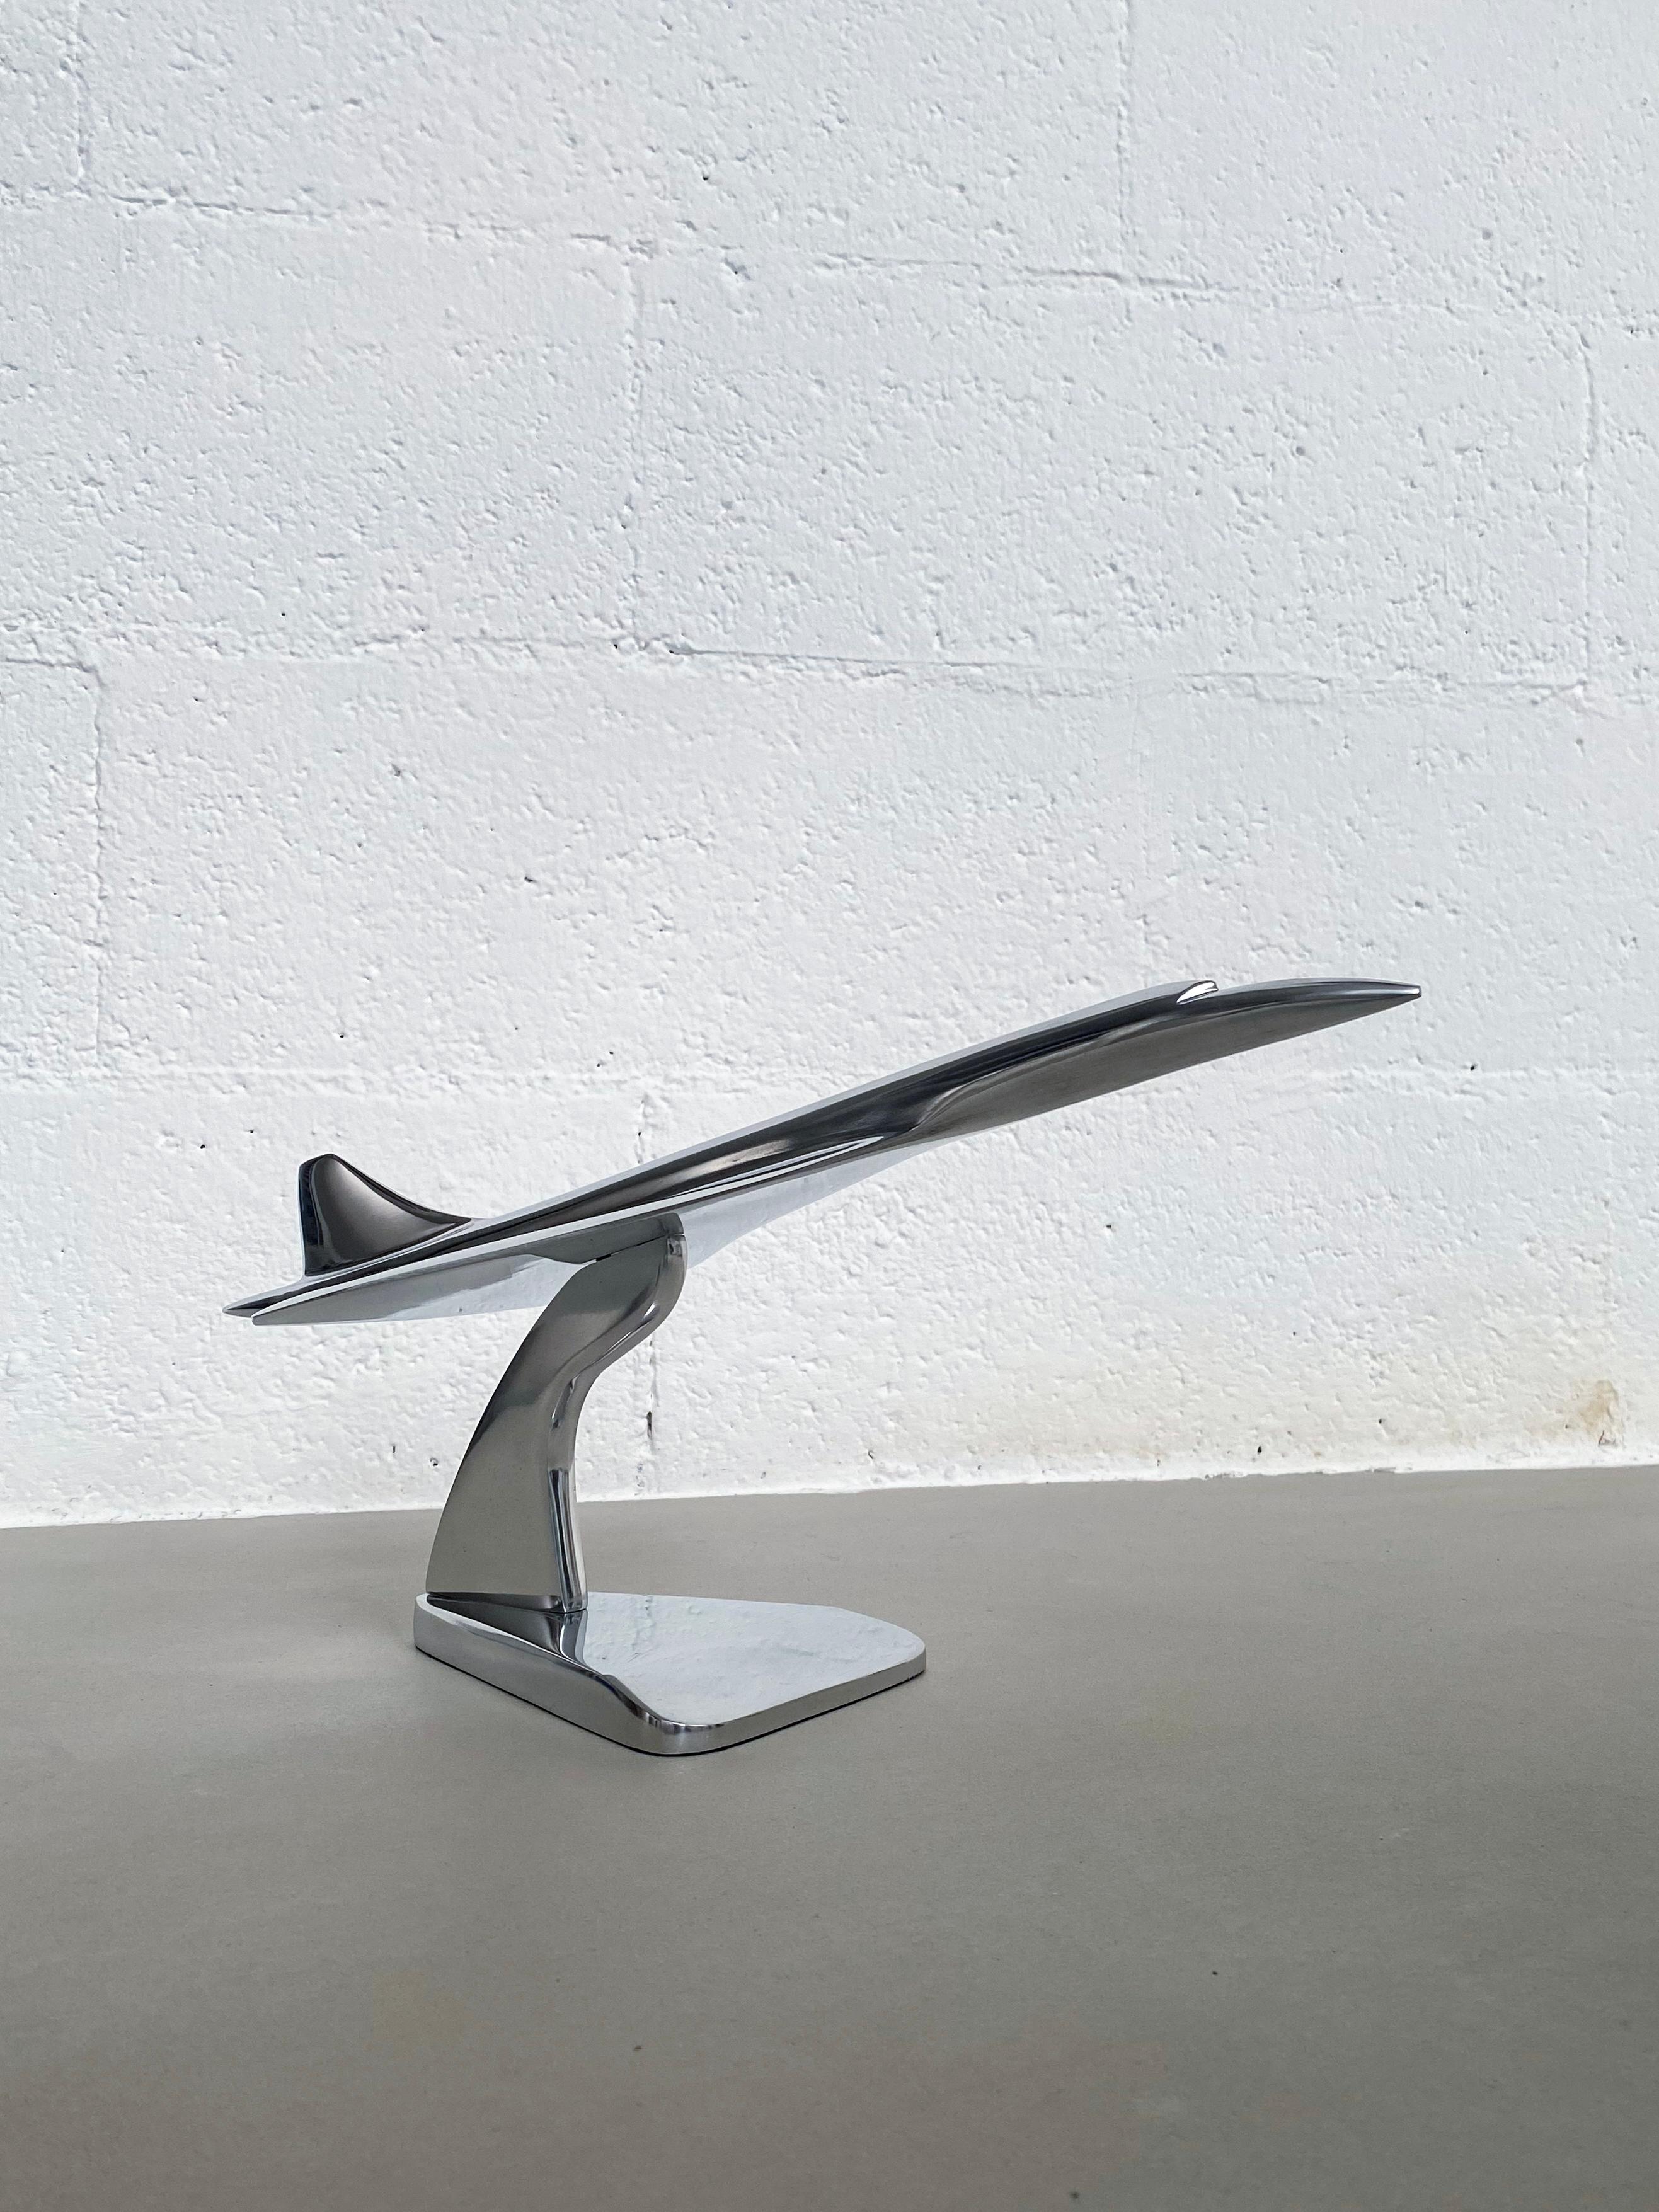 Italian Concorde Supersonic Plane Display Mounted Sculpture in Polished Stainless Steel For Sale